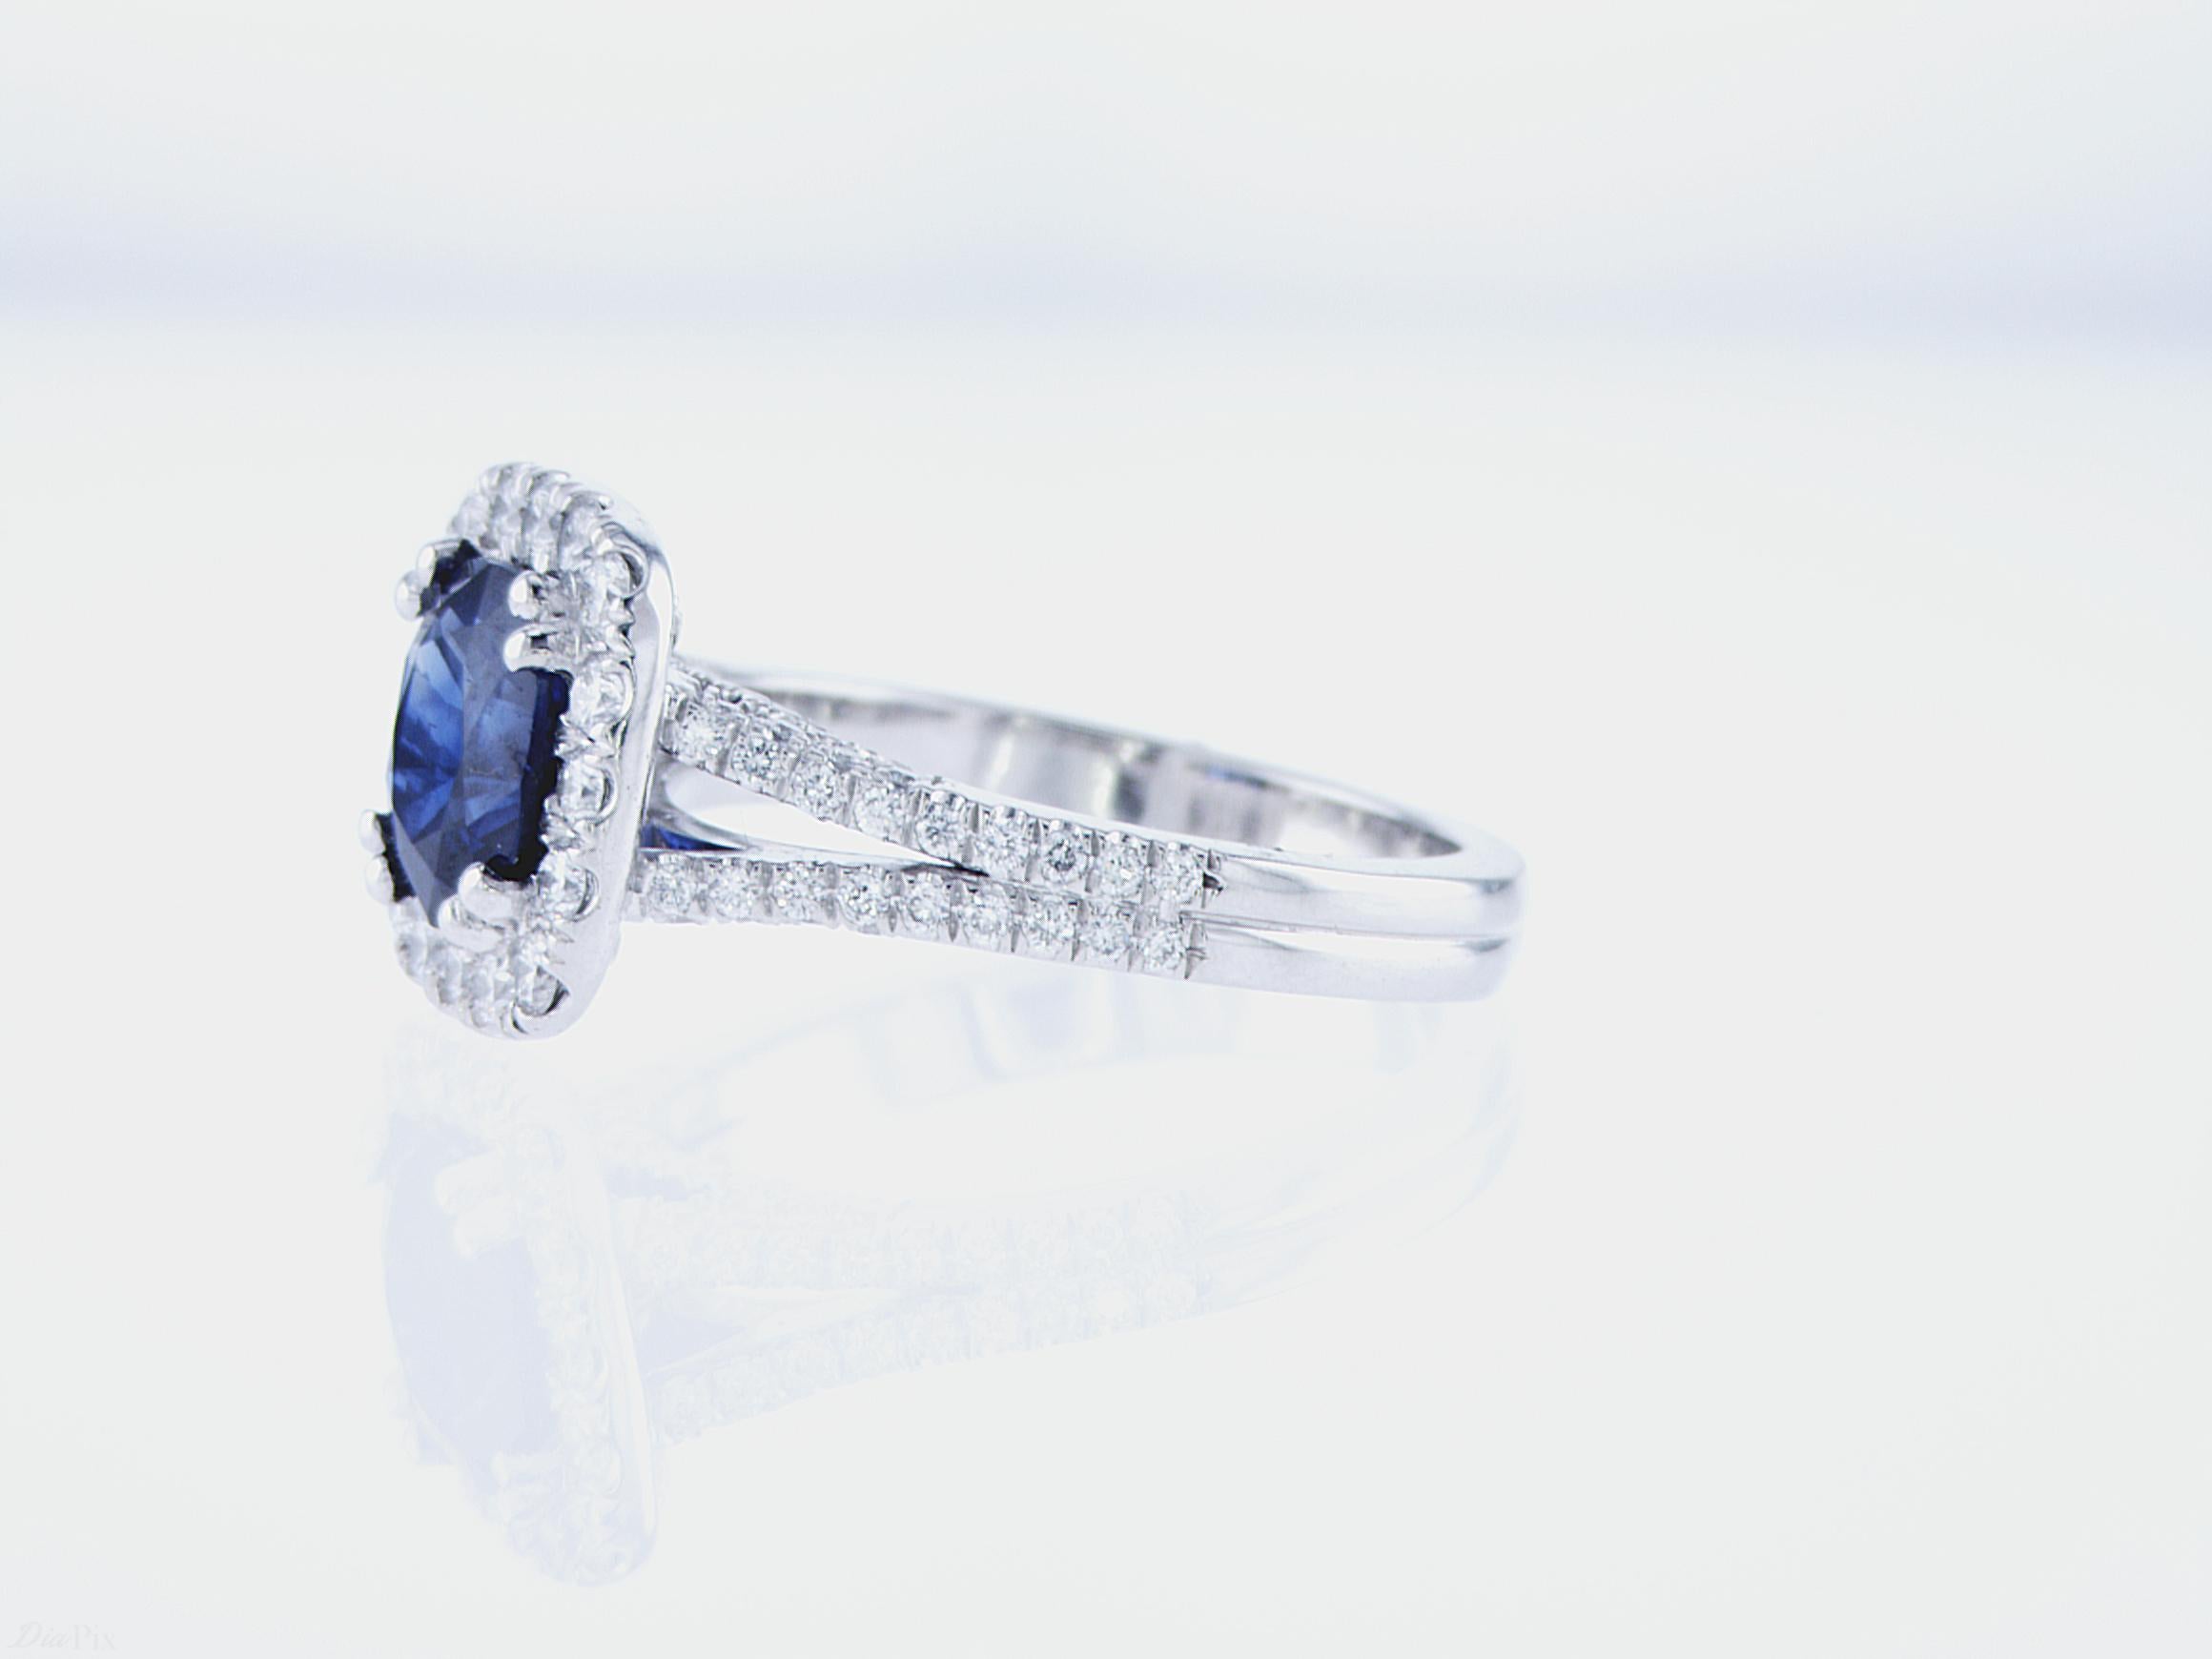 2.13ct Cushion Sapphire Cocktail Ring featuring 0.90ct Total Weight of Round Brilliant Diamonds, G/H Color, VS Clarity, in a Platinum Mounting.
